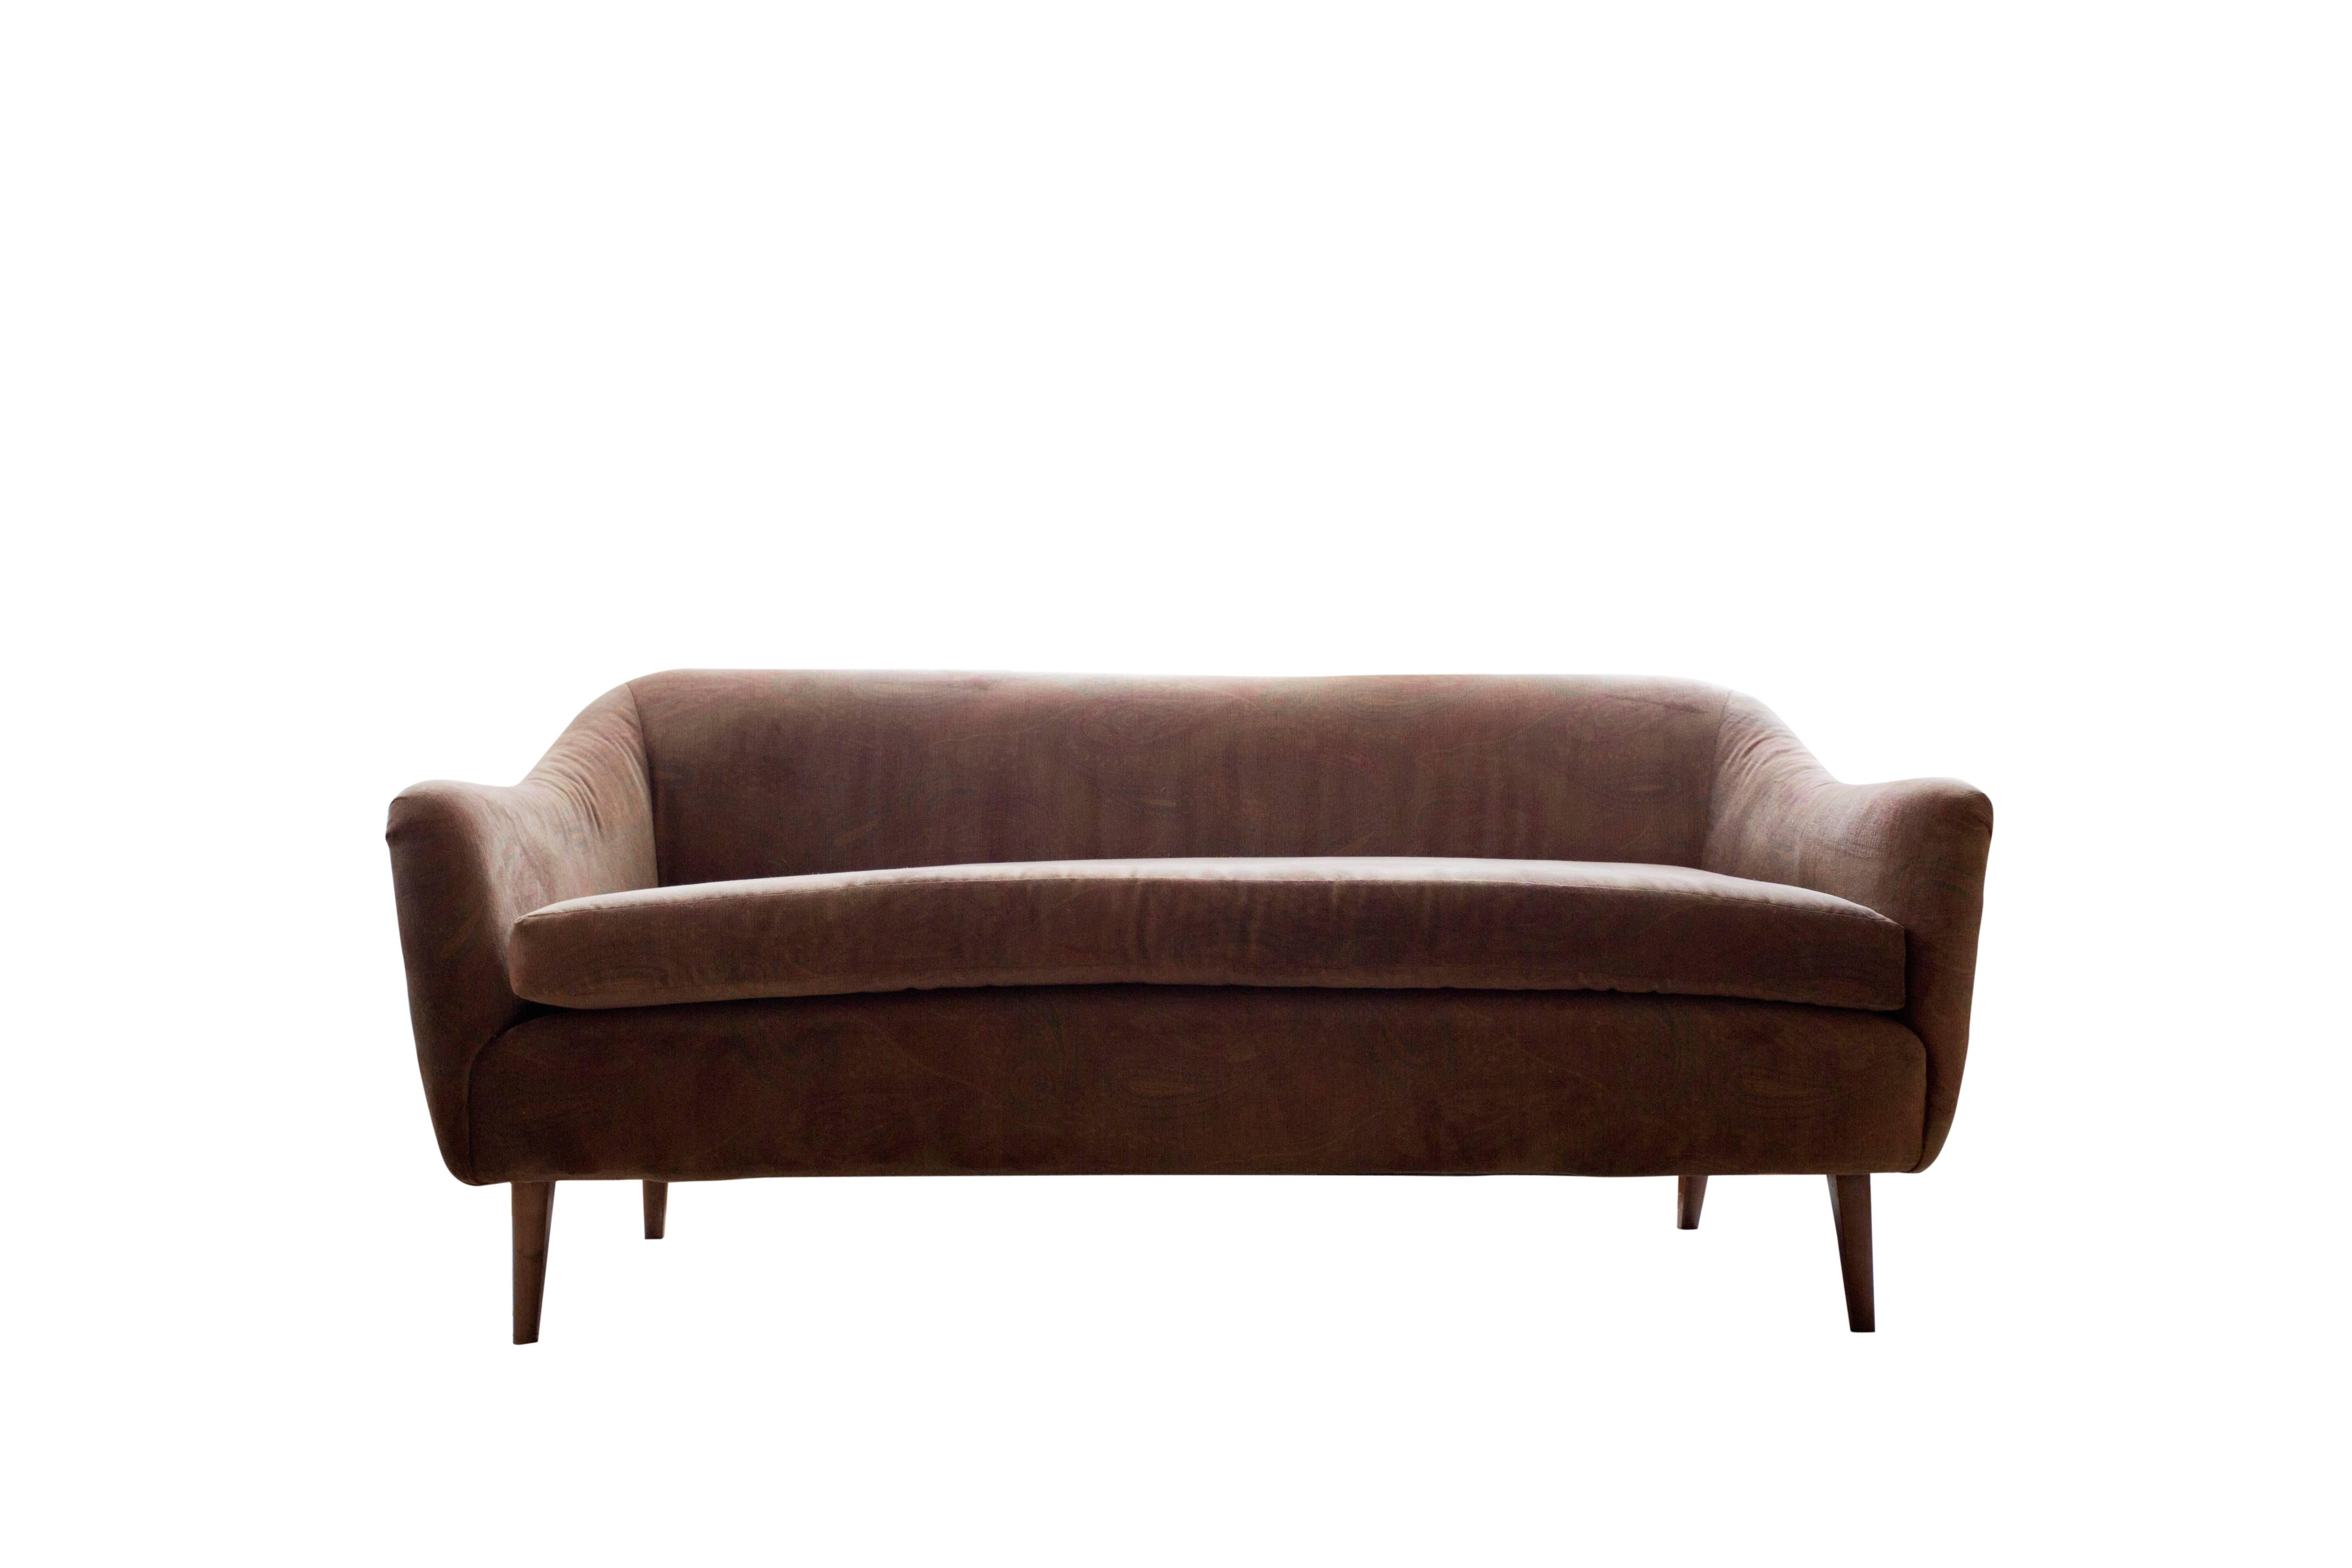 Recently upholstered in a brown paisley velvet fabric, this small sofa/loveseat/settee has wonderful curvaceous lines and very comfortable to sit for long hours.